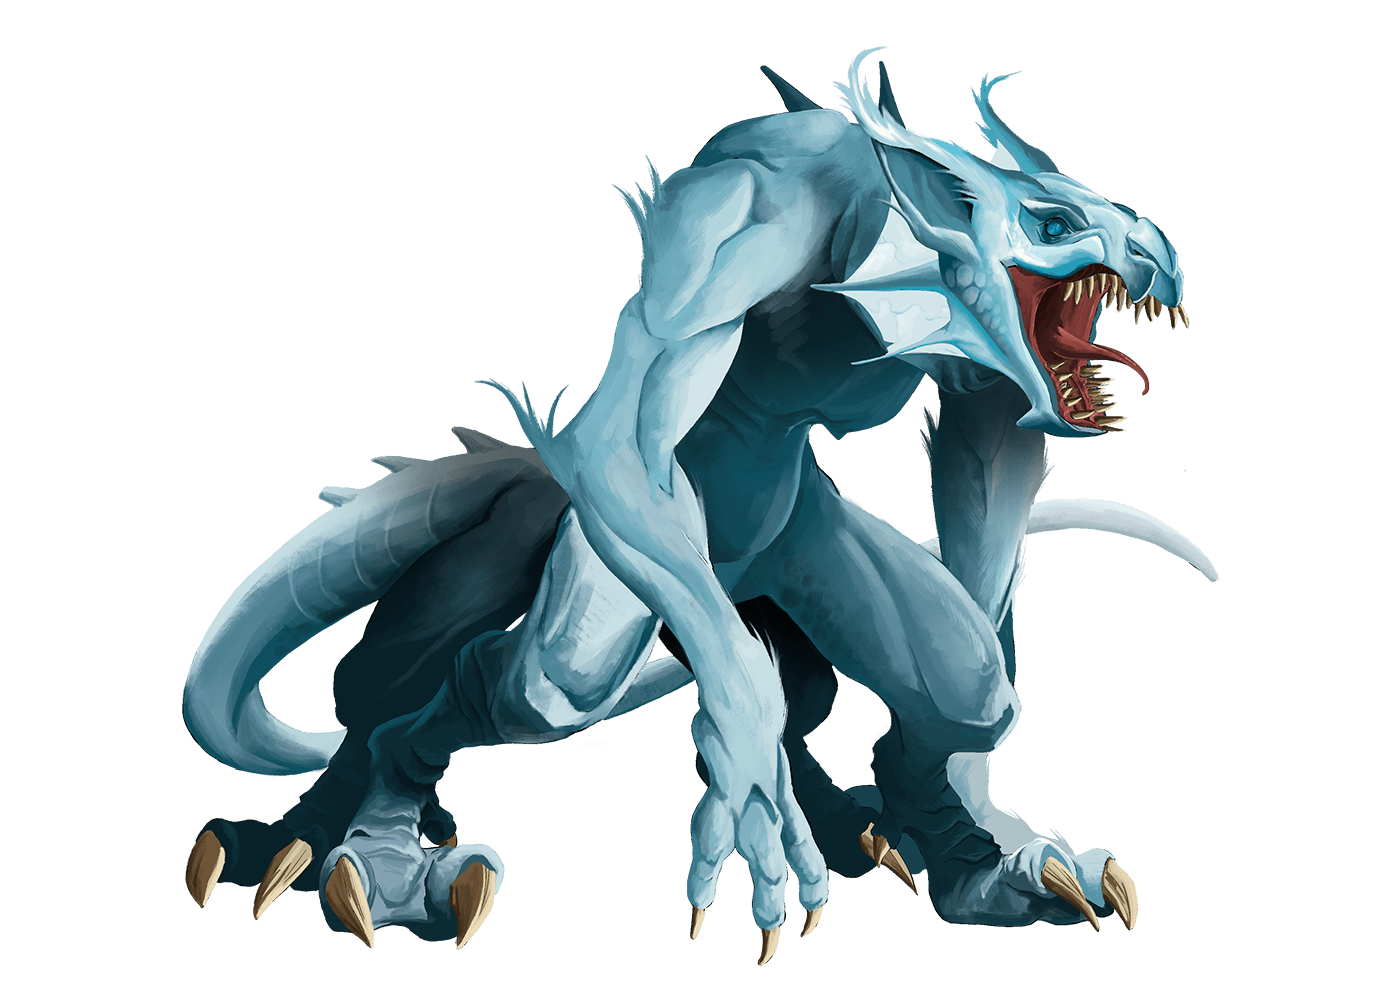 A bipedal draconic monster with sharp claws and large fangs roars in fury.